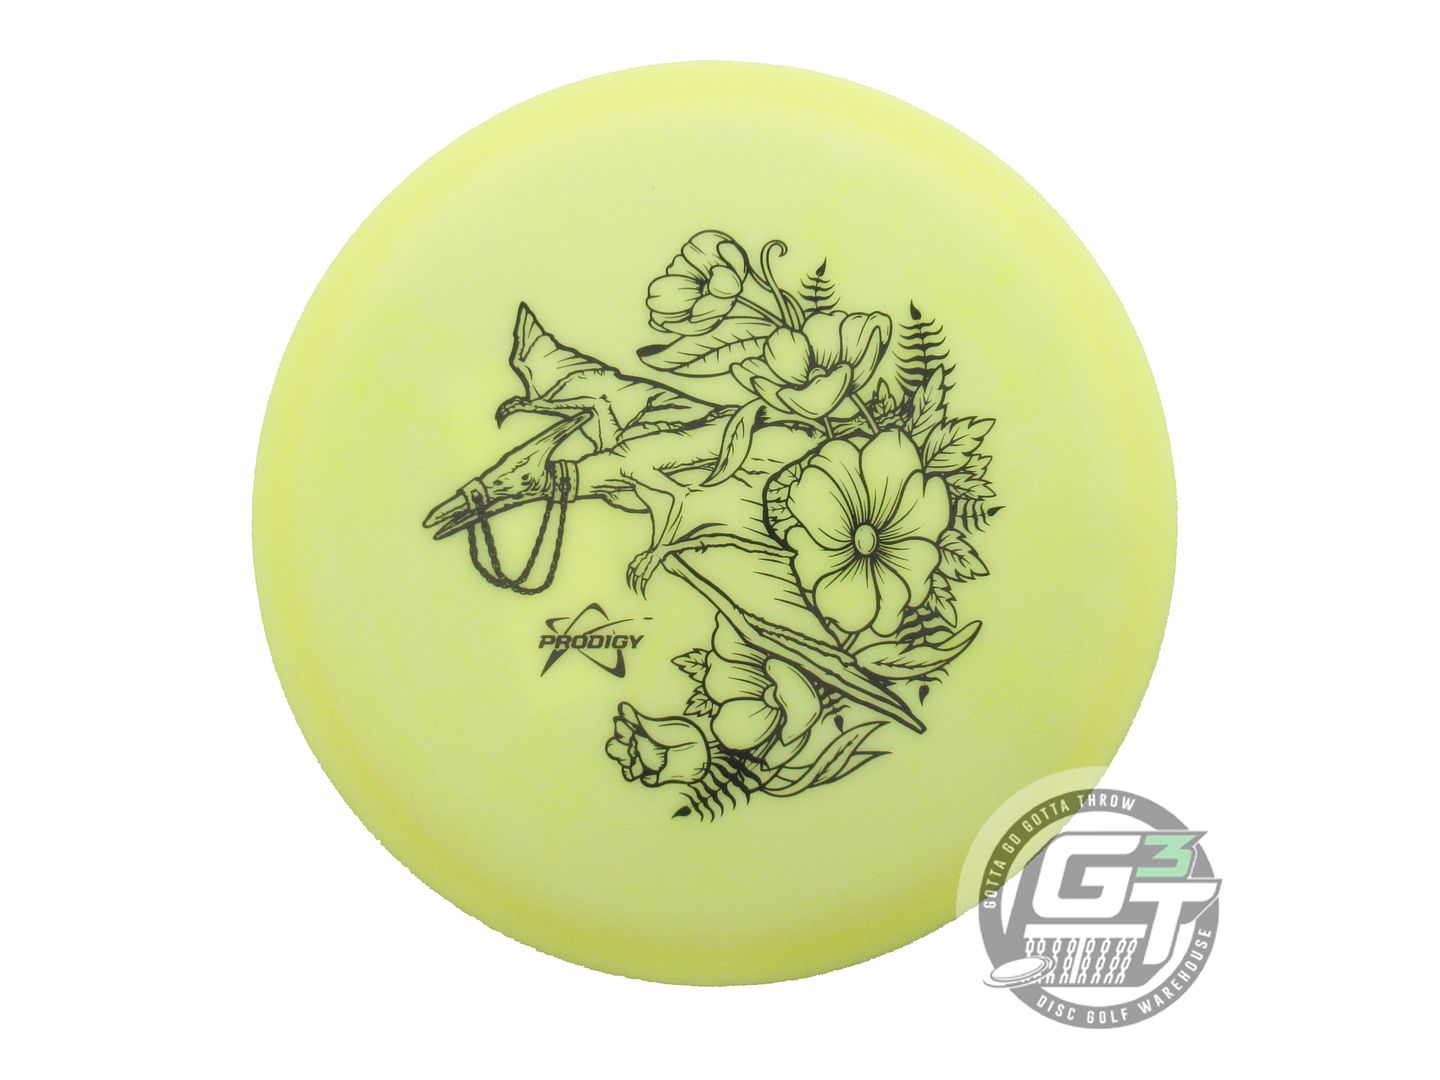 Prodigy Limited Edition Soarivora Stamp 300 Series F7 Fairway Driver Golf Disc (Individually Listed)